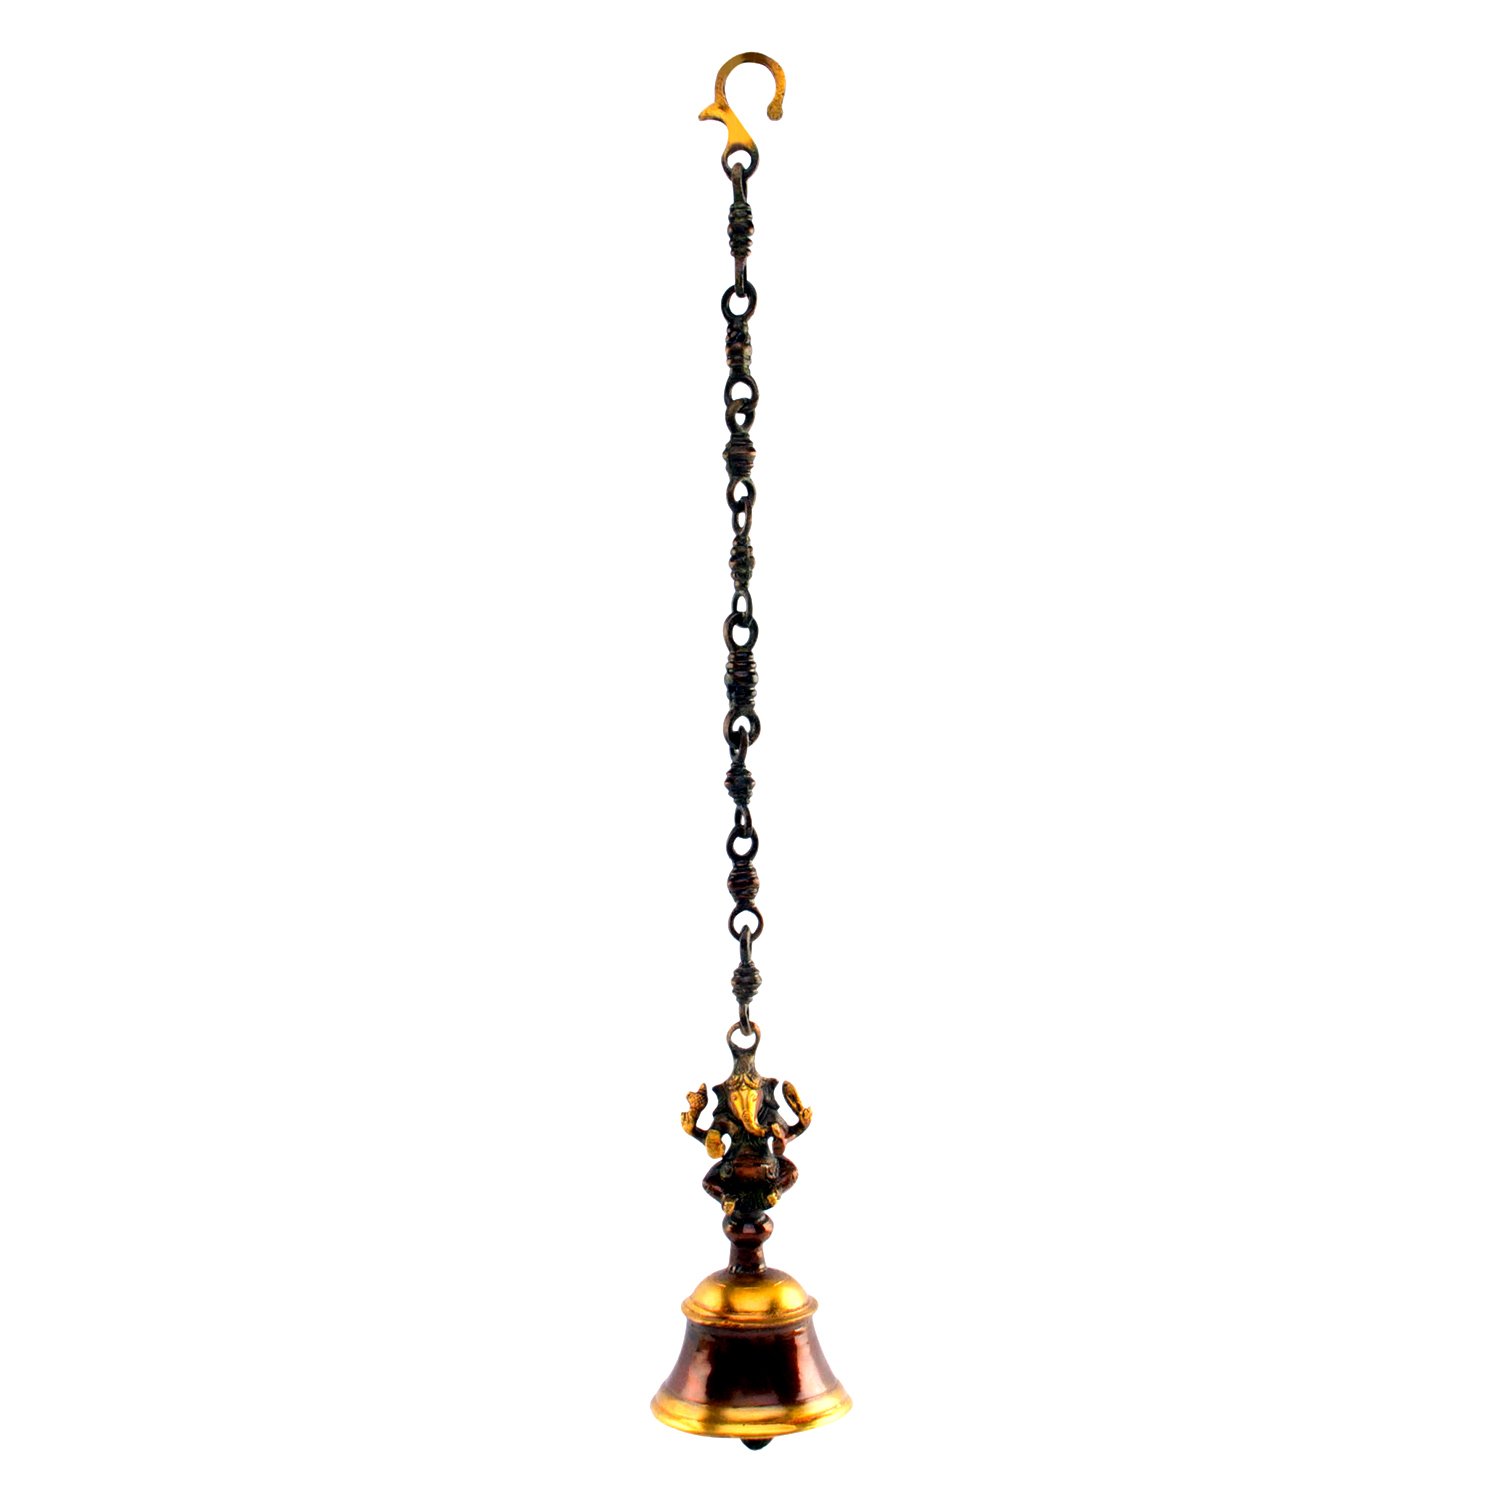 Brass Wall Door Air Ding Dong Puja Hanging Bells for Home Mandir Temple  Living Room Decoration Pooja Decorative Items, Ganesh